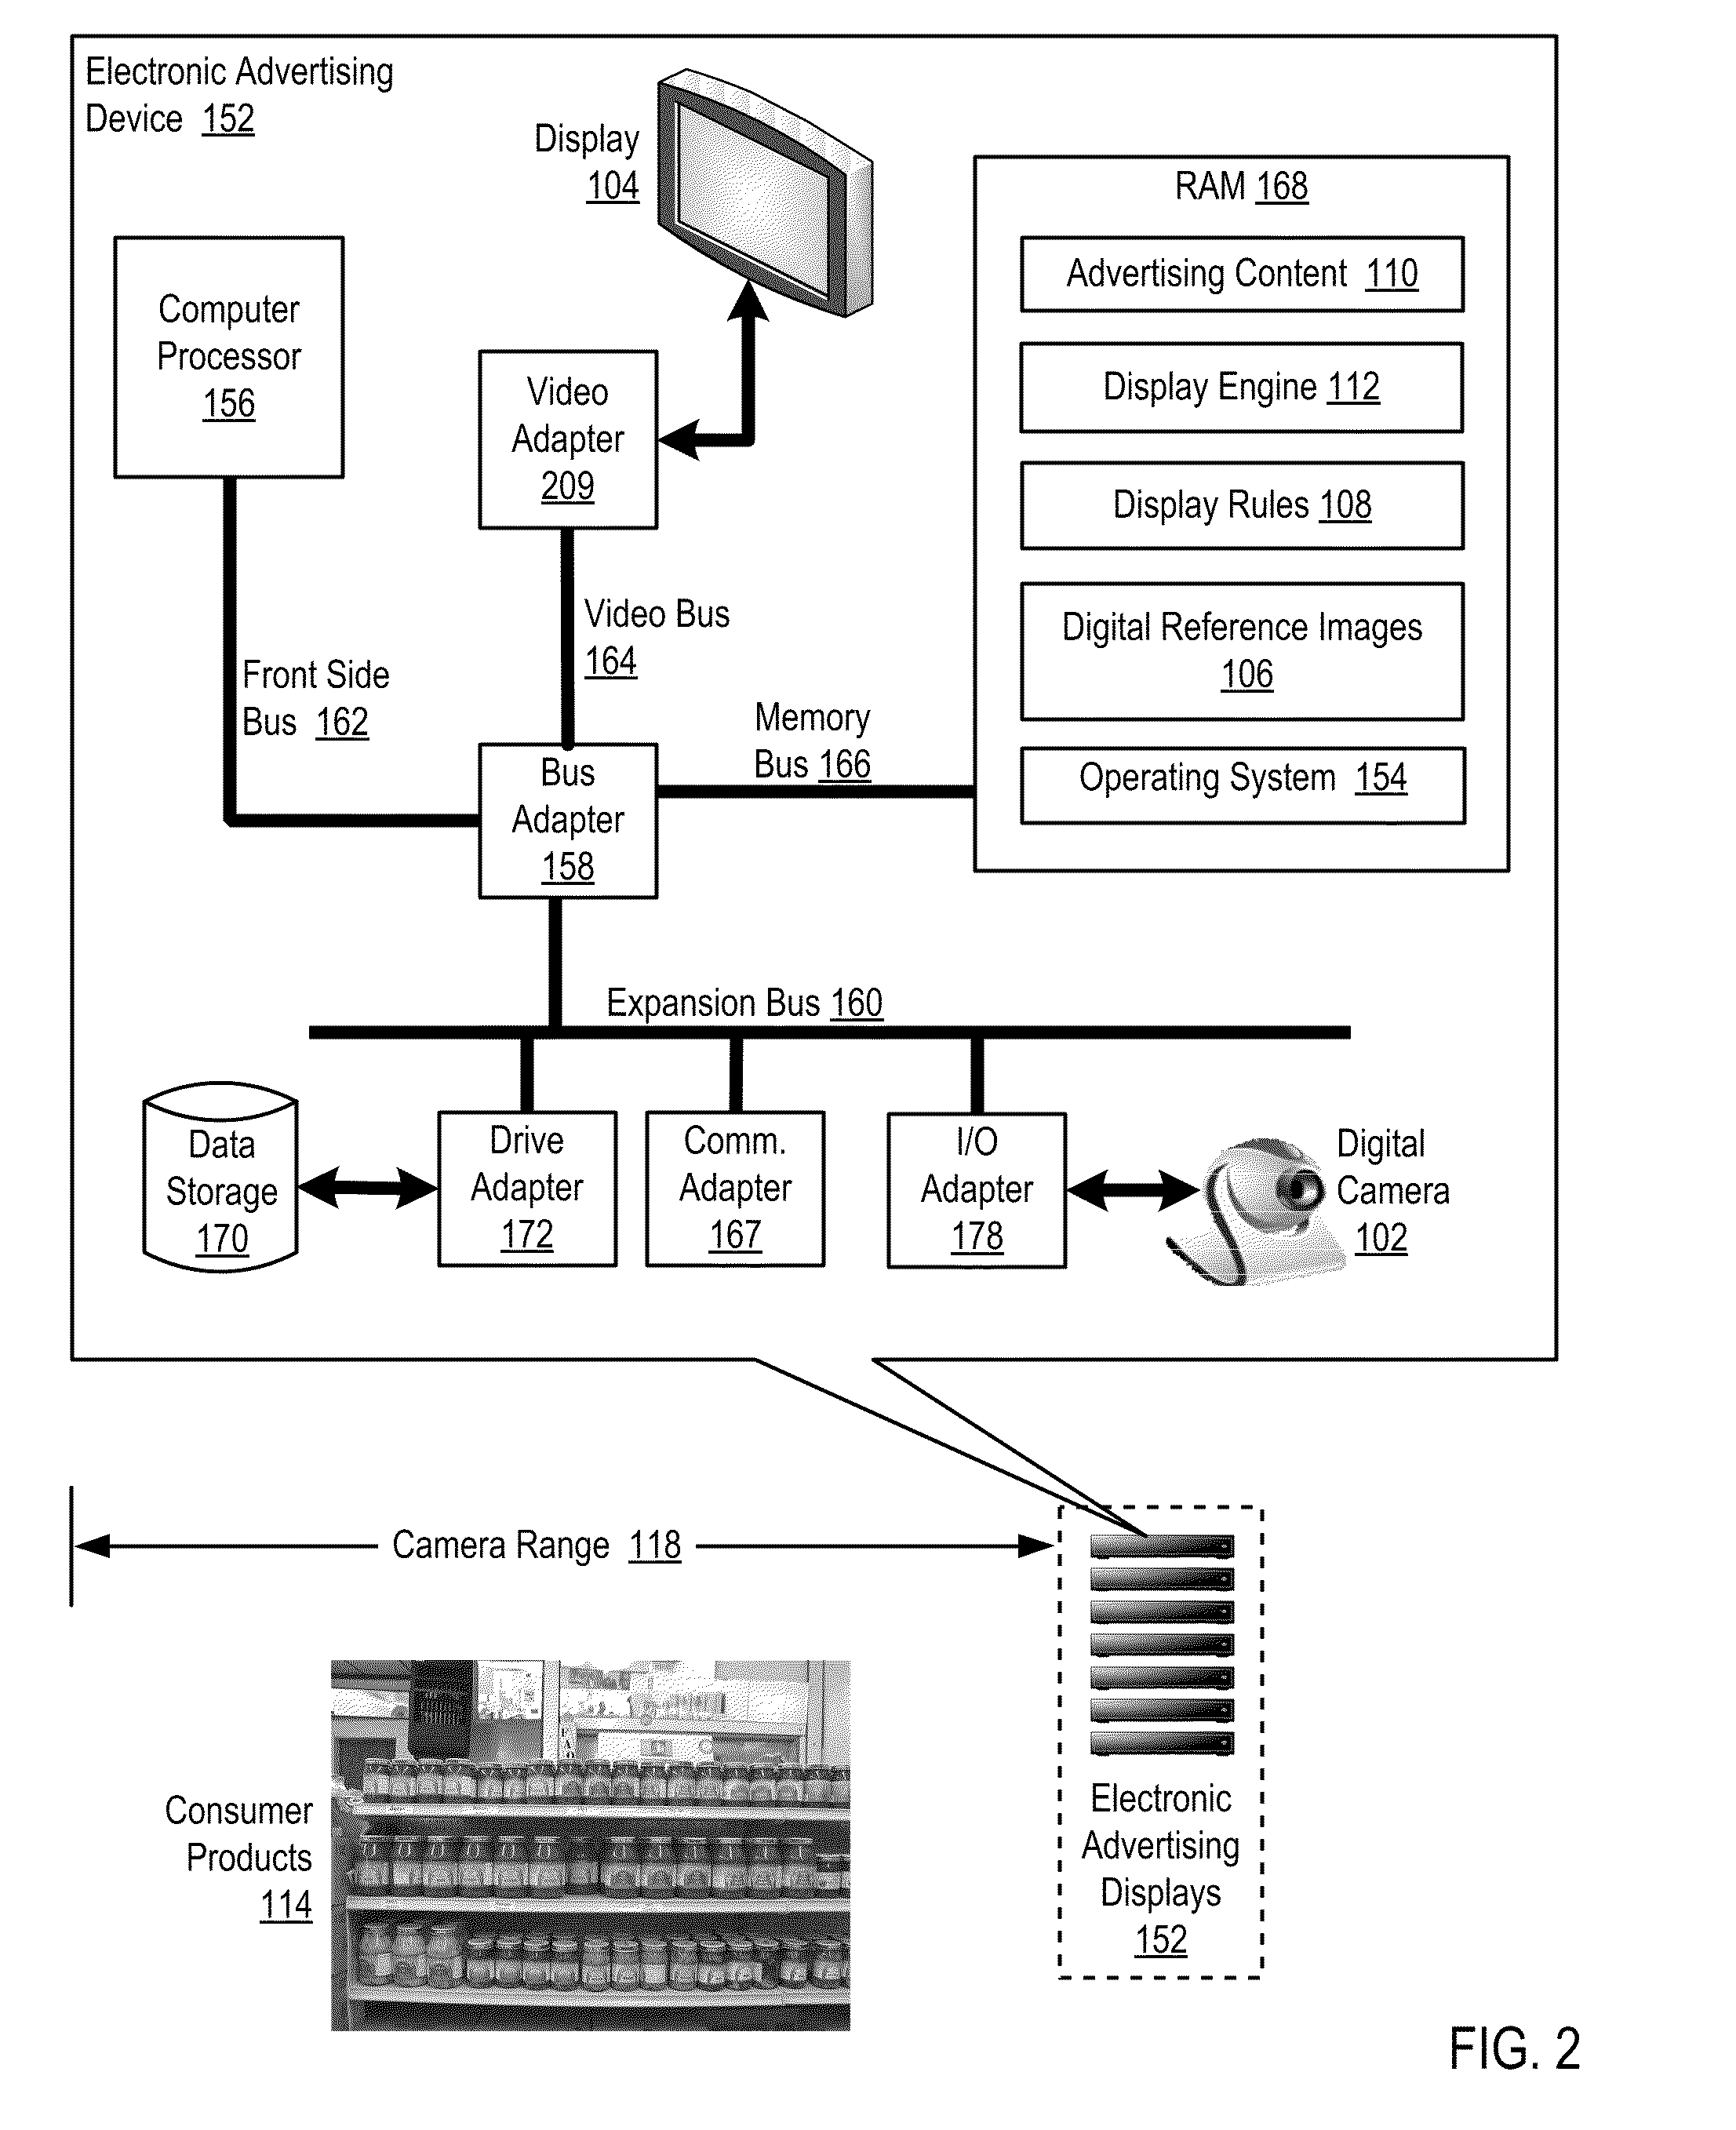 Operating An Electronic Advertising Device